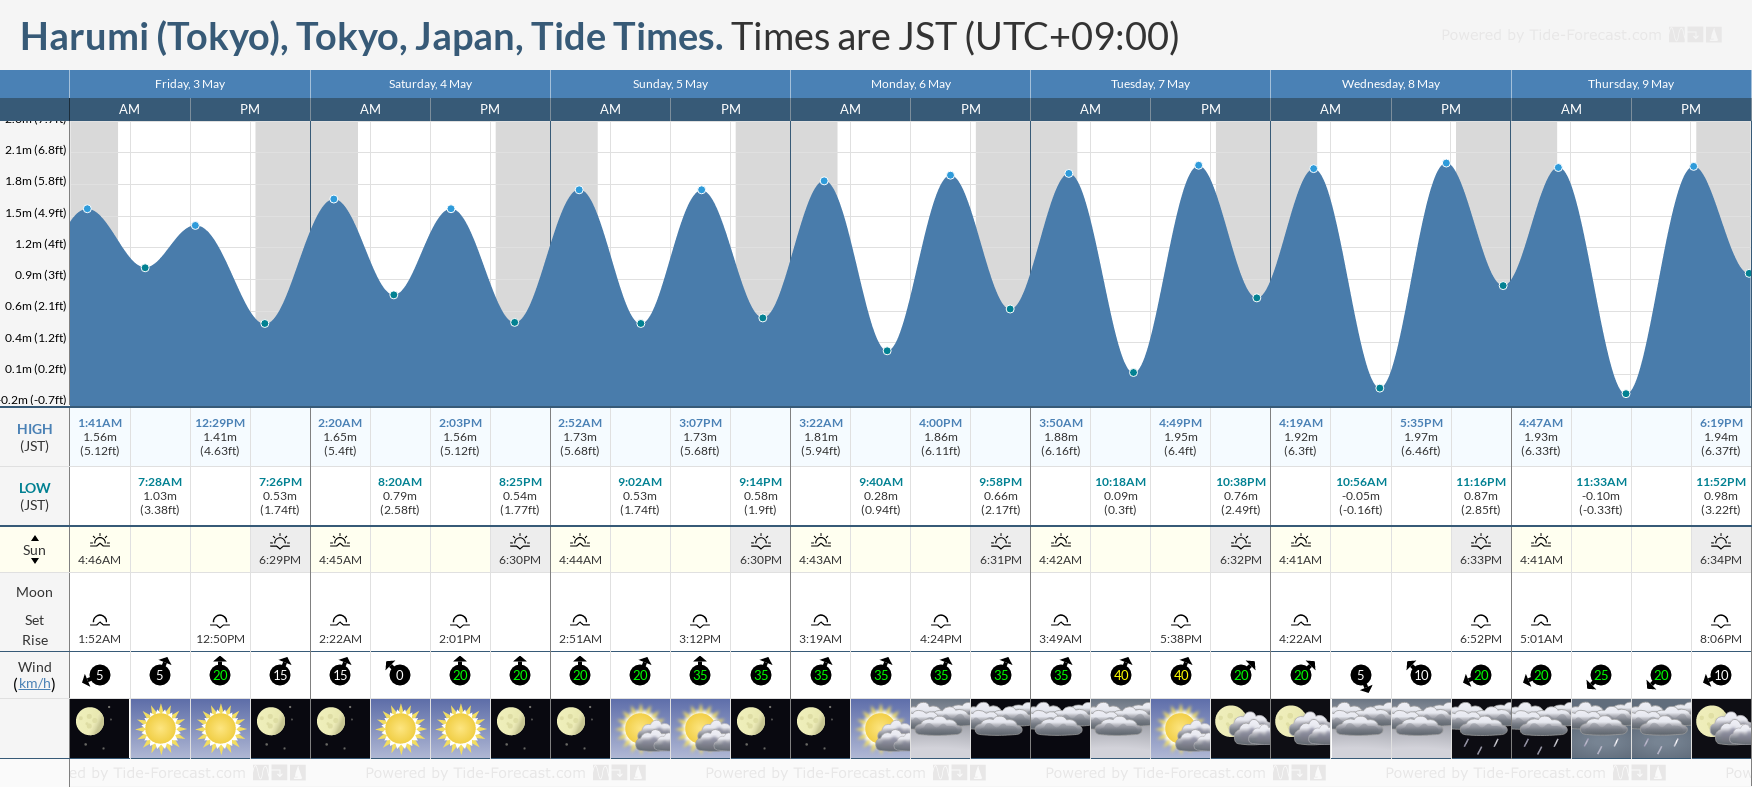 Harumi (Tokyo), Tokyo, Japan Tide Chart including high and low tide times for the next 7 days